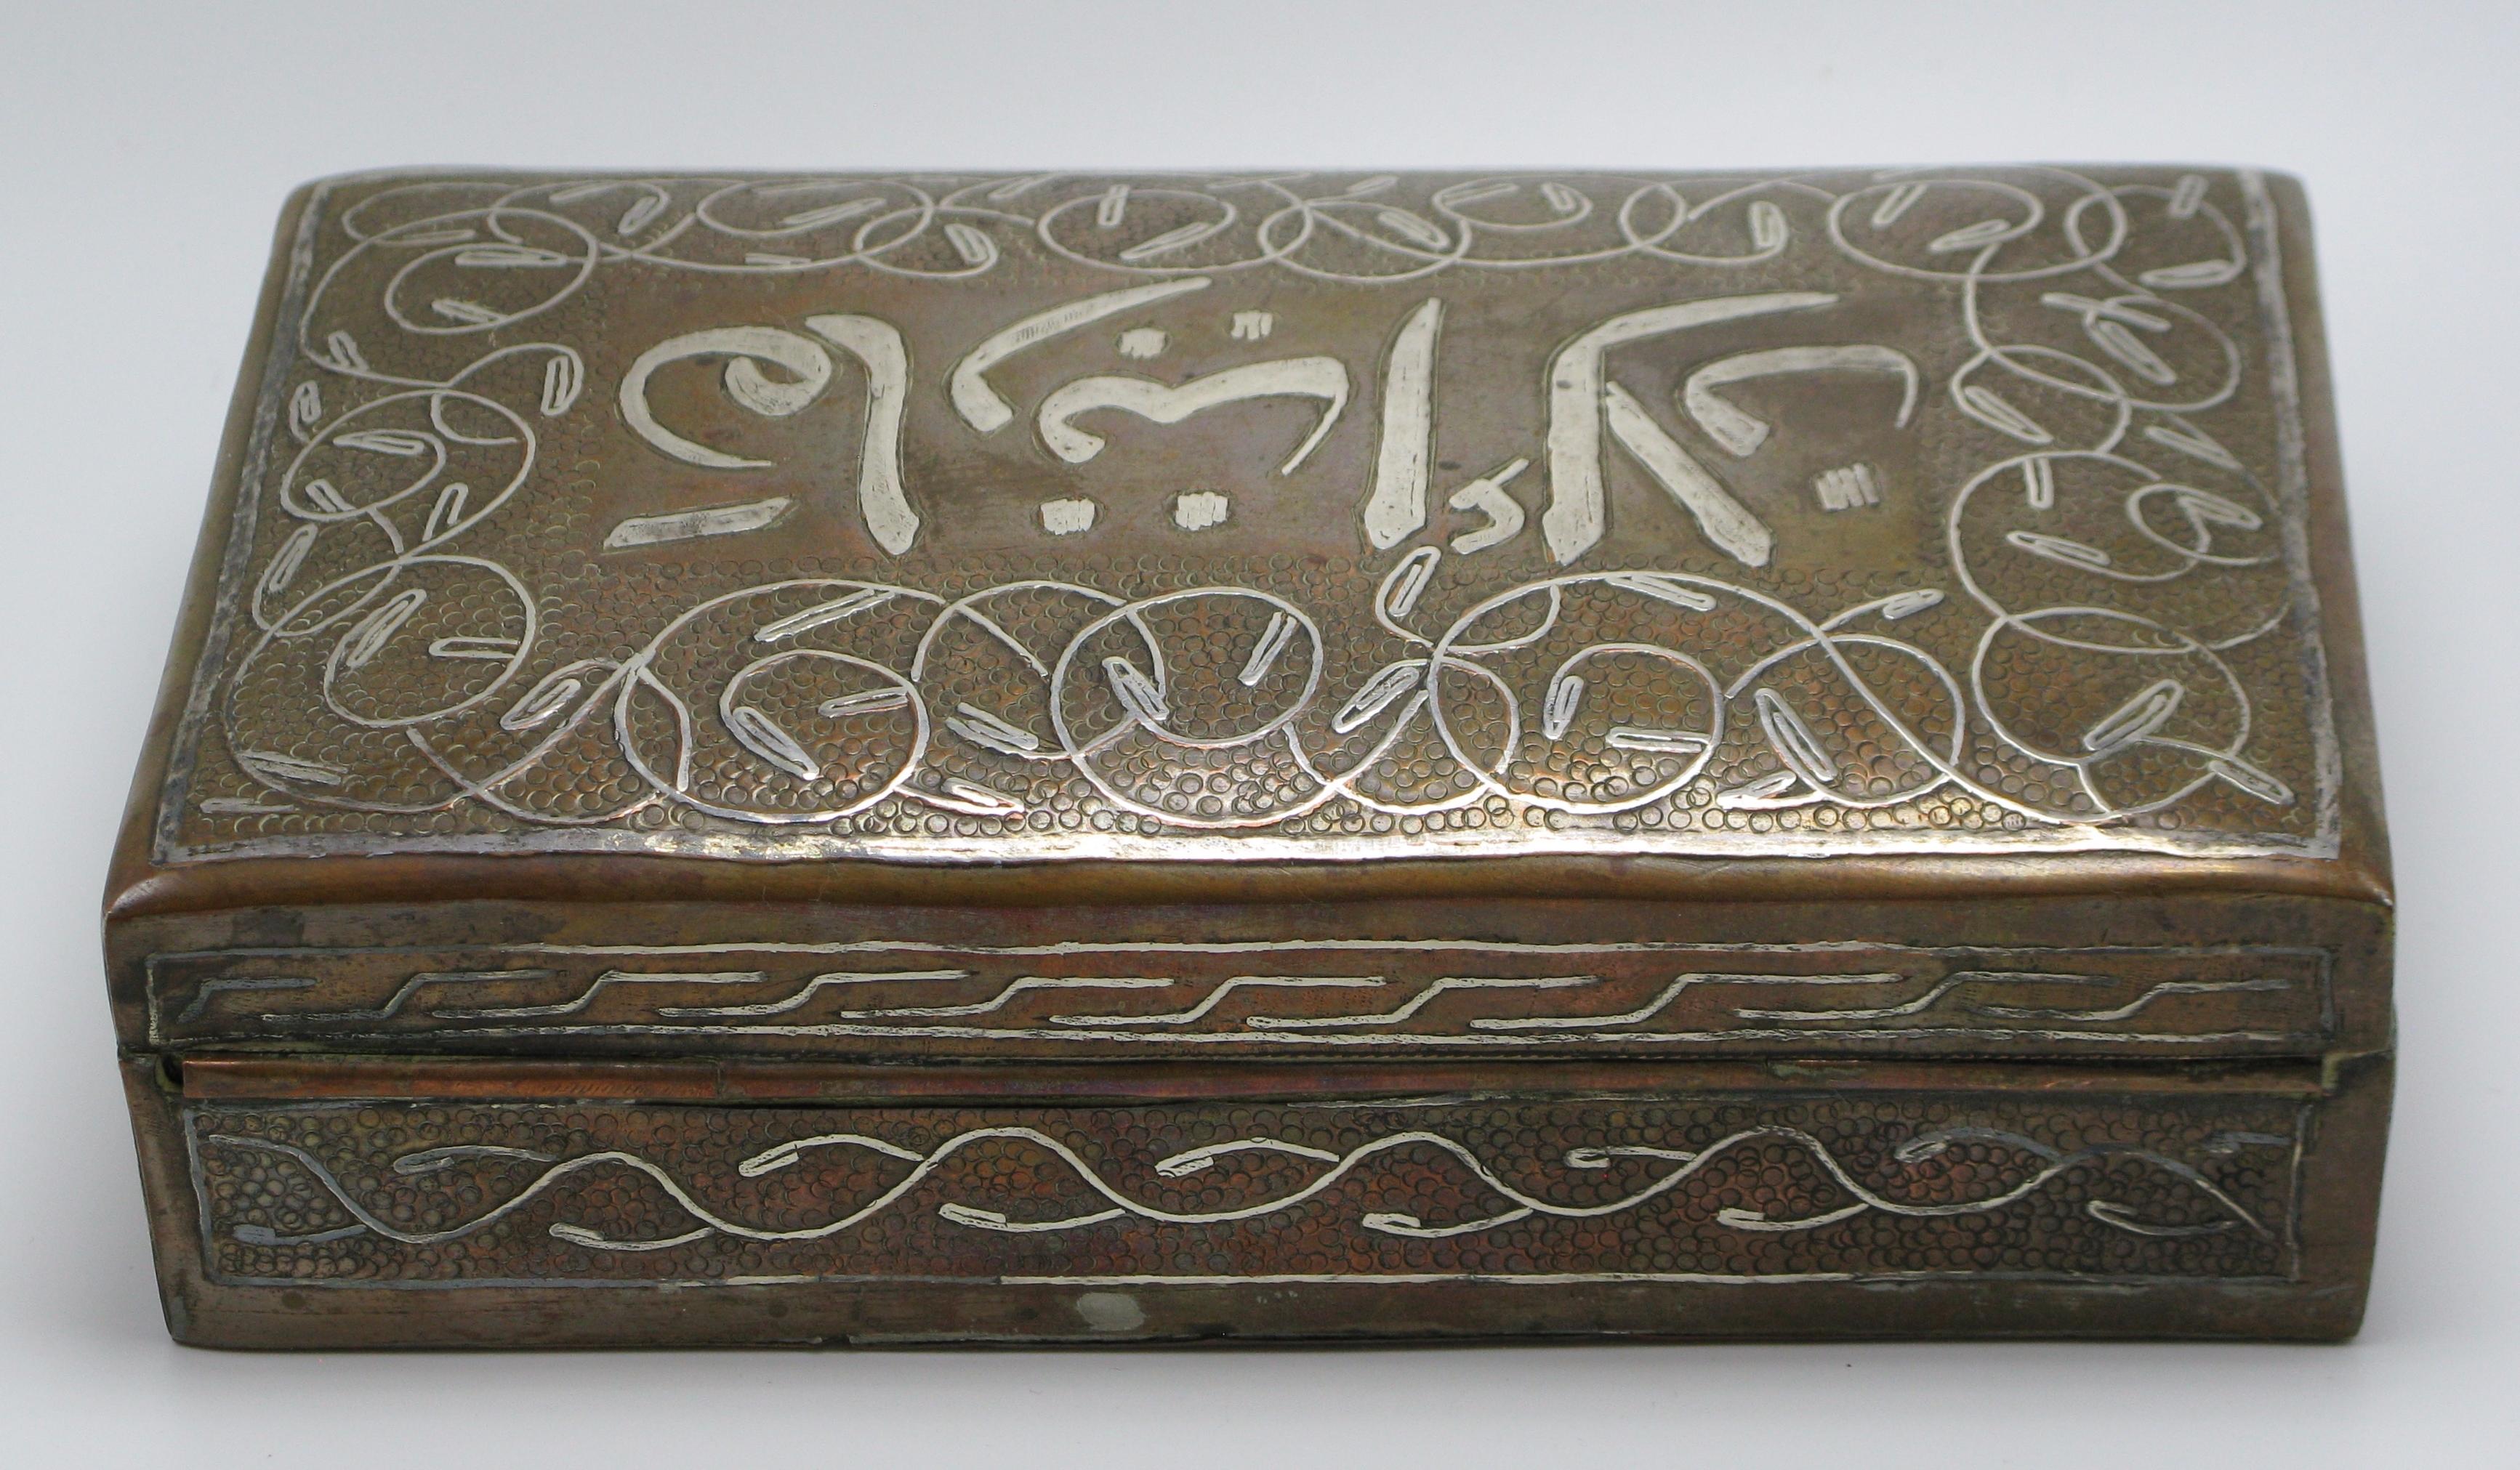 Antique Islamic silver calligraphy damascened copper jewelry box with cedar wood interior. Original felt on bottom to protect surfaces. Syria, circa 1900-1920.
